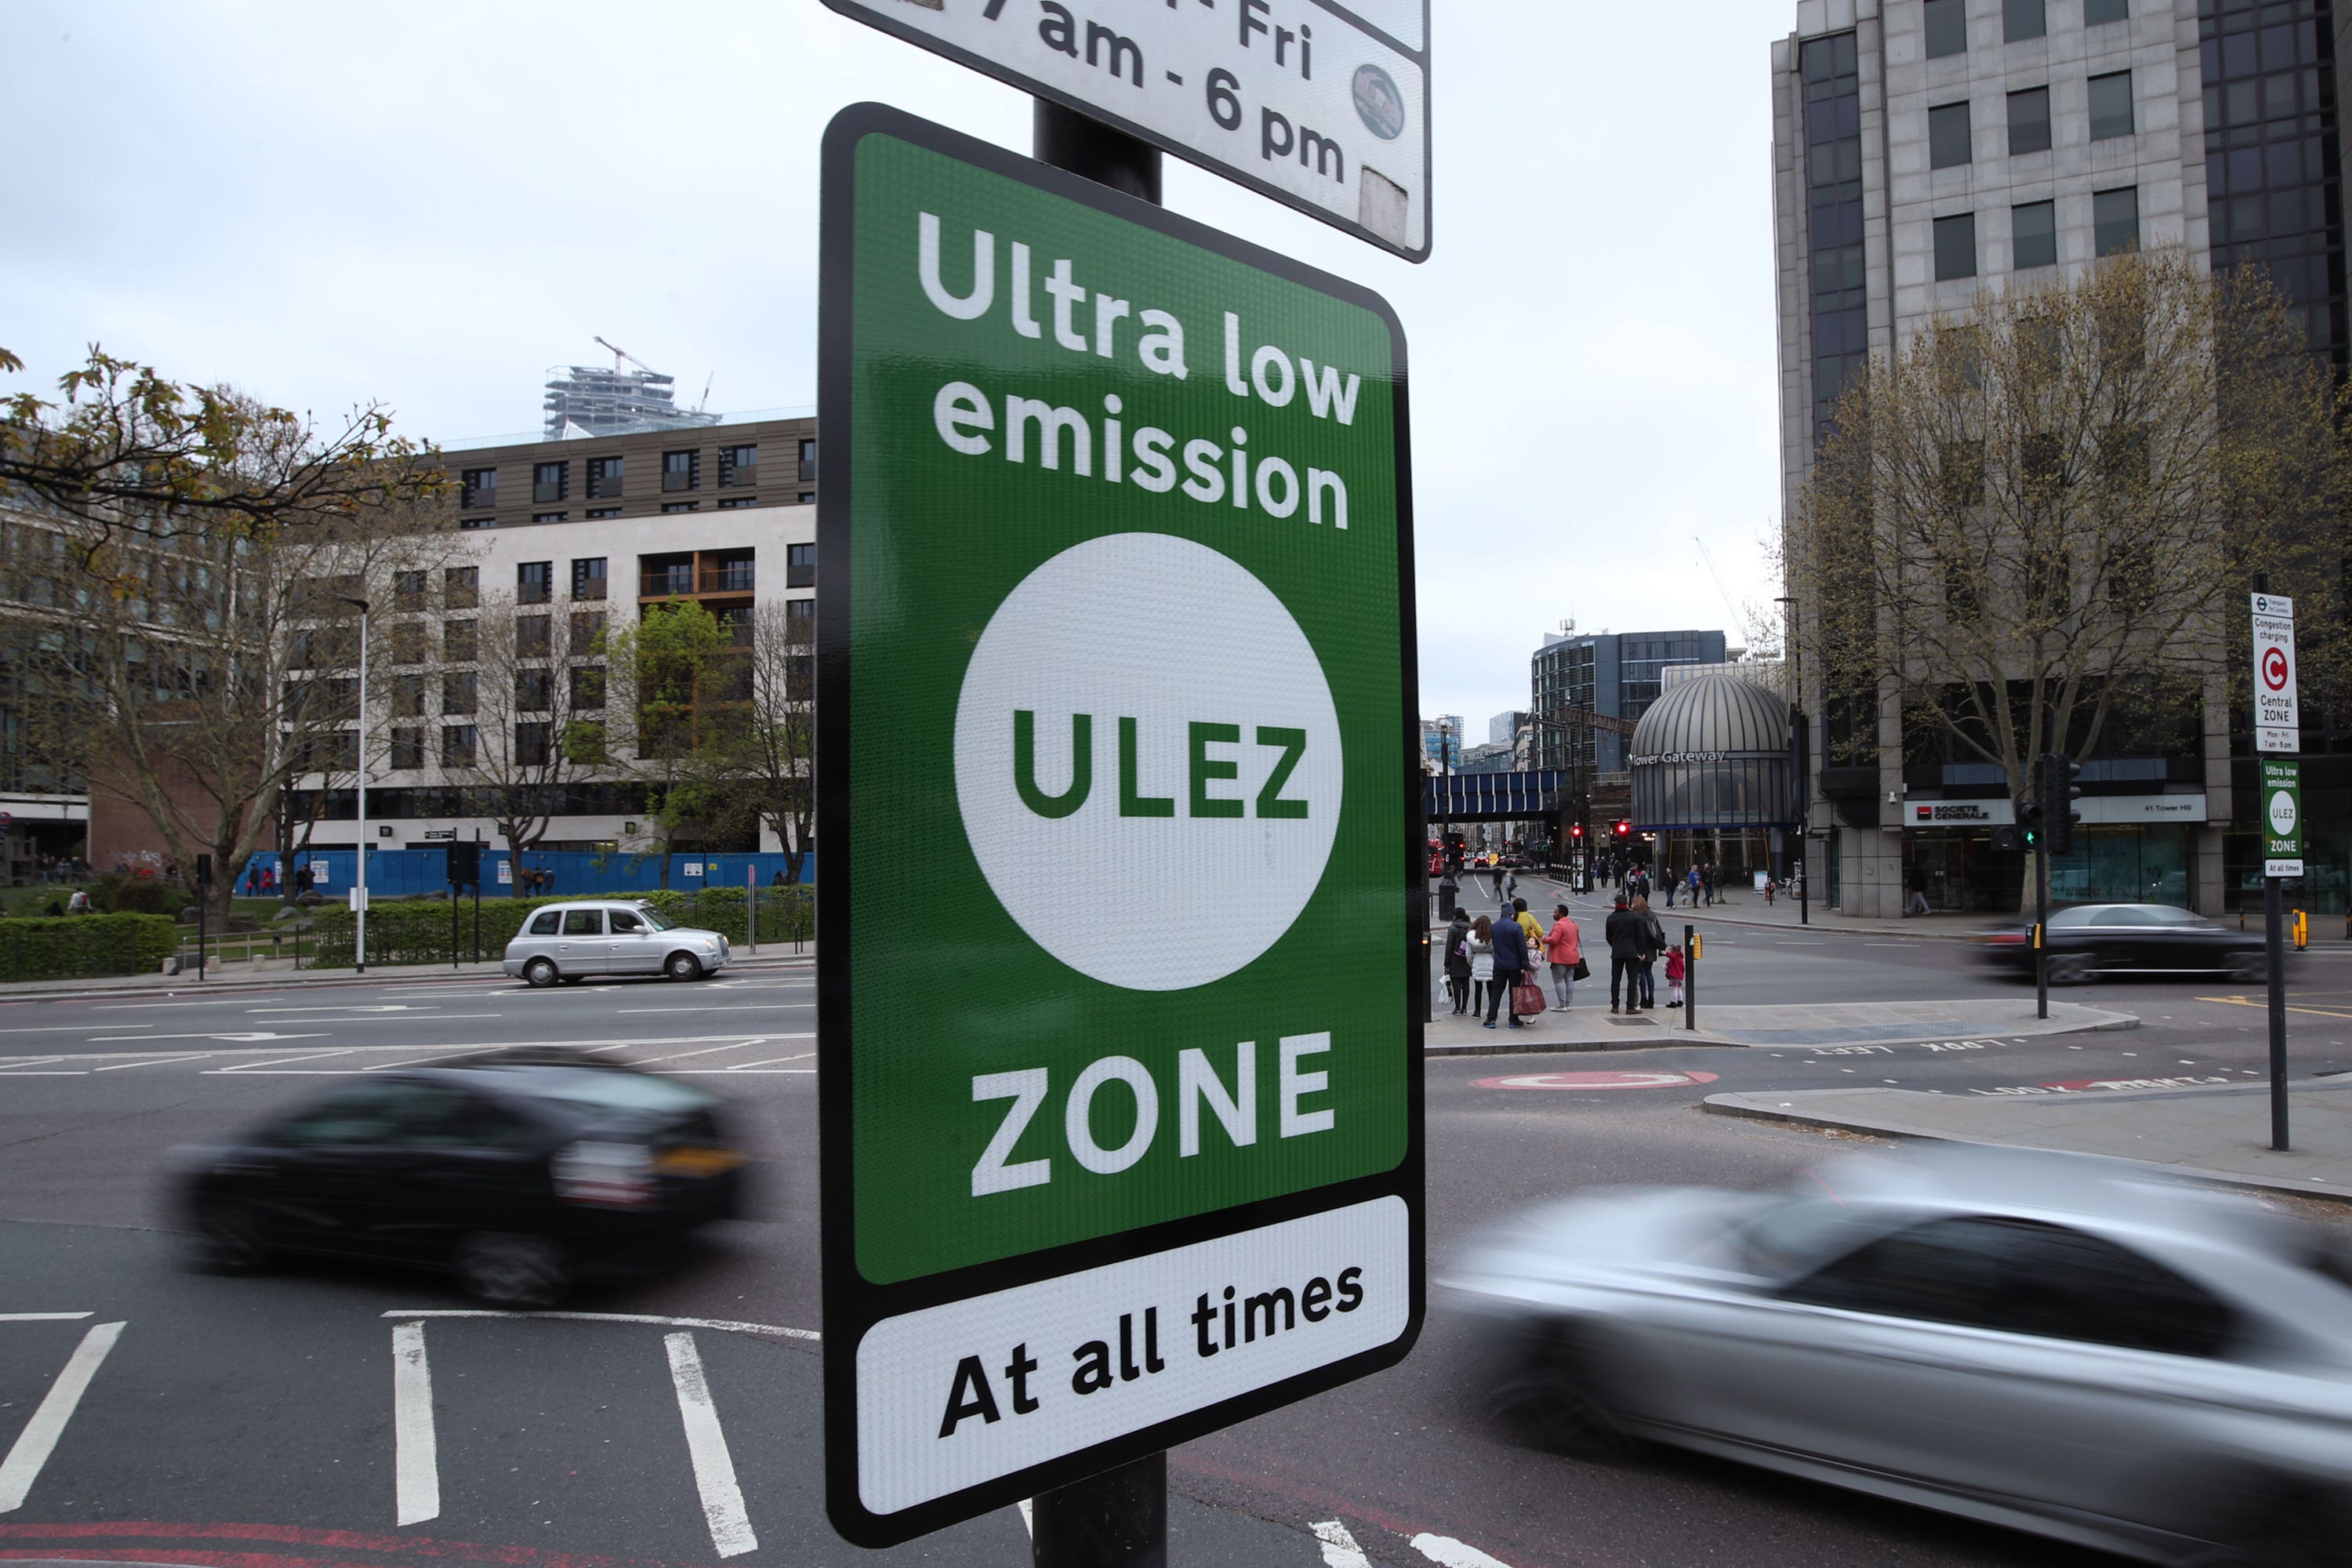 The Ulez scheme is set to be expanded